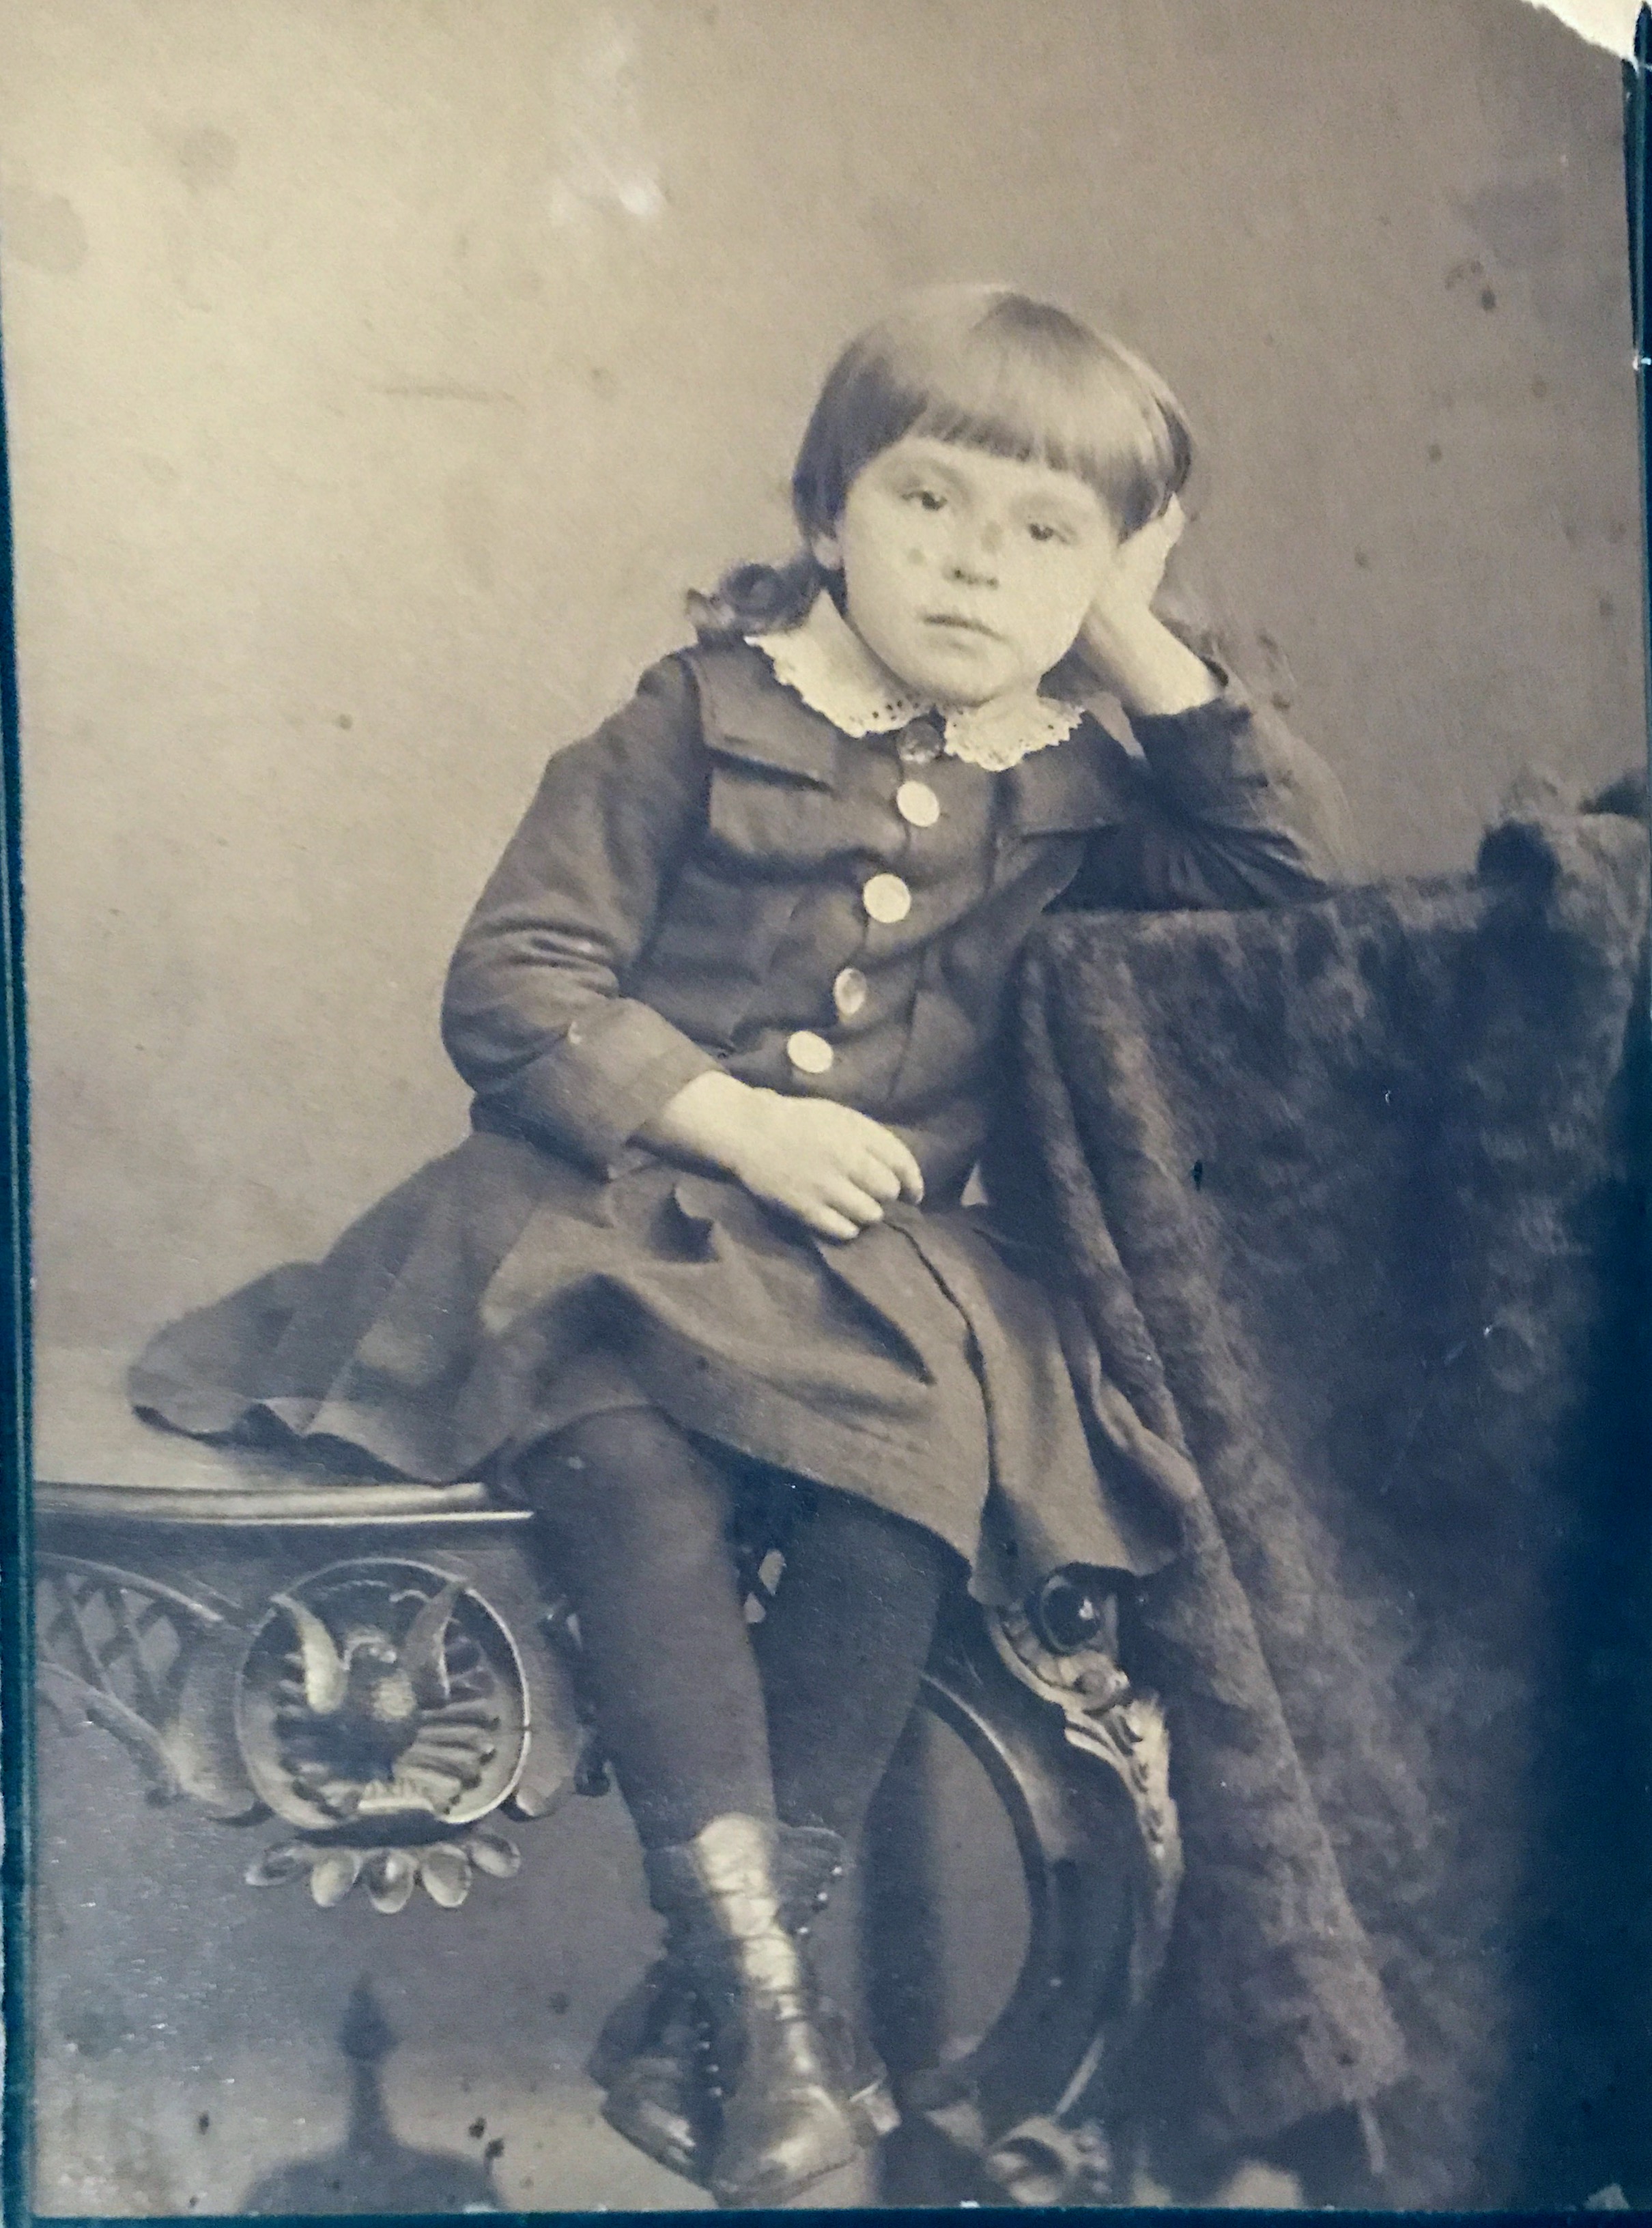 Walter Gordon Turnbull born October 23, 1883. Son of Walter Chisholm Turnbull and Isabela Brodie. Age 4 years old. Photo taken at Farmer Brothers Photographers 10 King St. West, Hamilton, ON. 